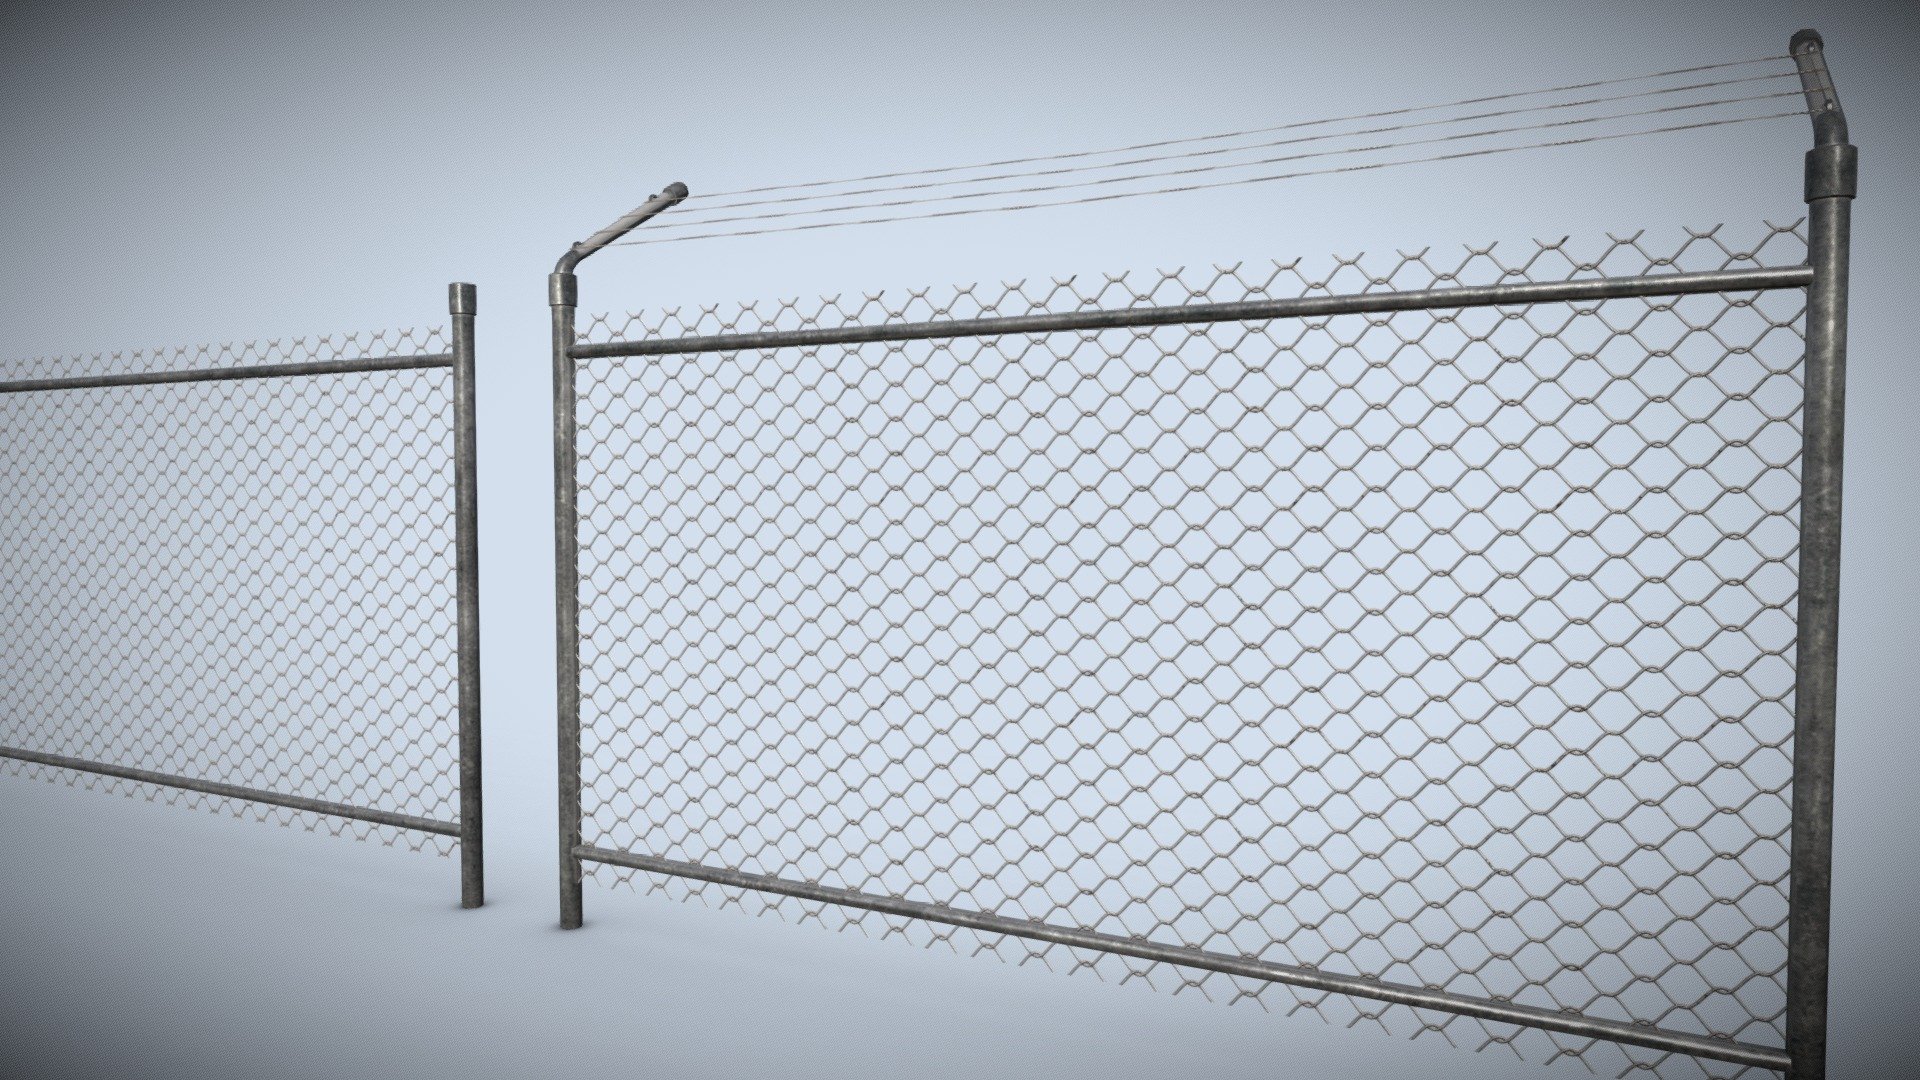 Netting Mesh Fence Kit Low Poly
1 Polygons 408 Vertices 448 2 Polygons 164 Vertices 182 - Netting Mesh Fence Kit Low Poly Low-poly 3D mode - Buy Royalty Free 3D model by Svetlana07 3d model